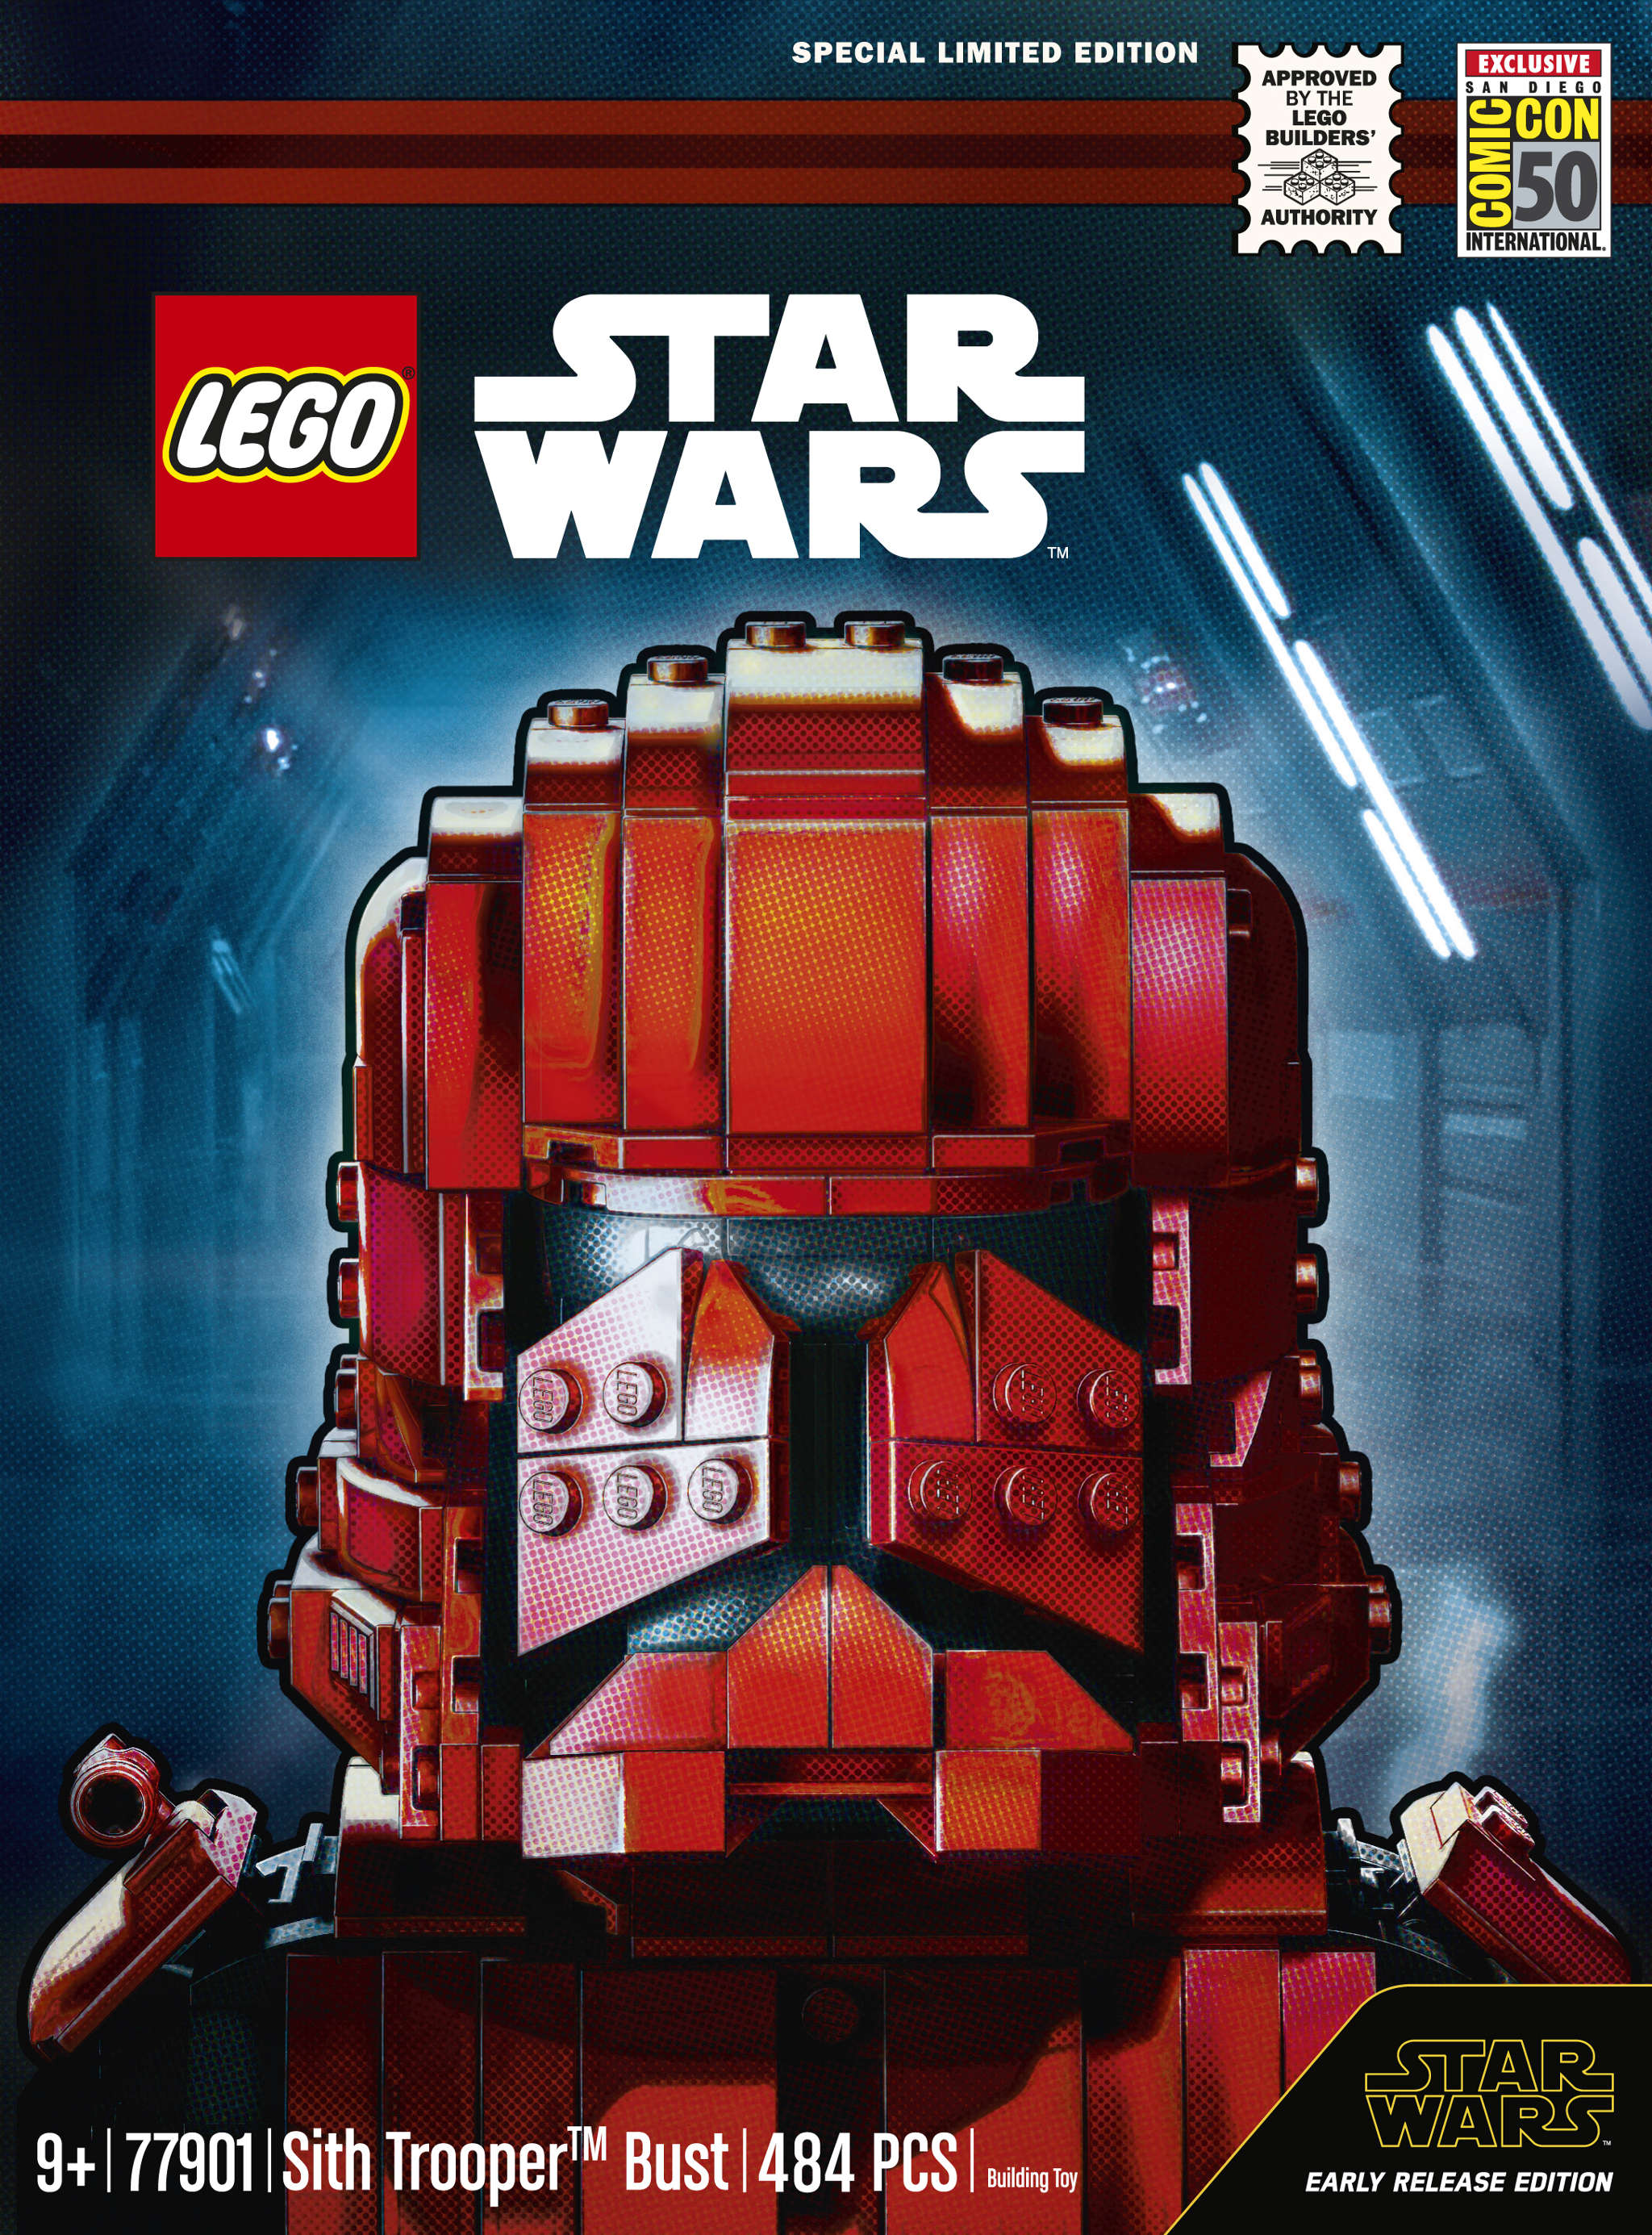 Sith Trooper Bust Is The Lego Star Wars Sdcc Exclusive Flipboard